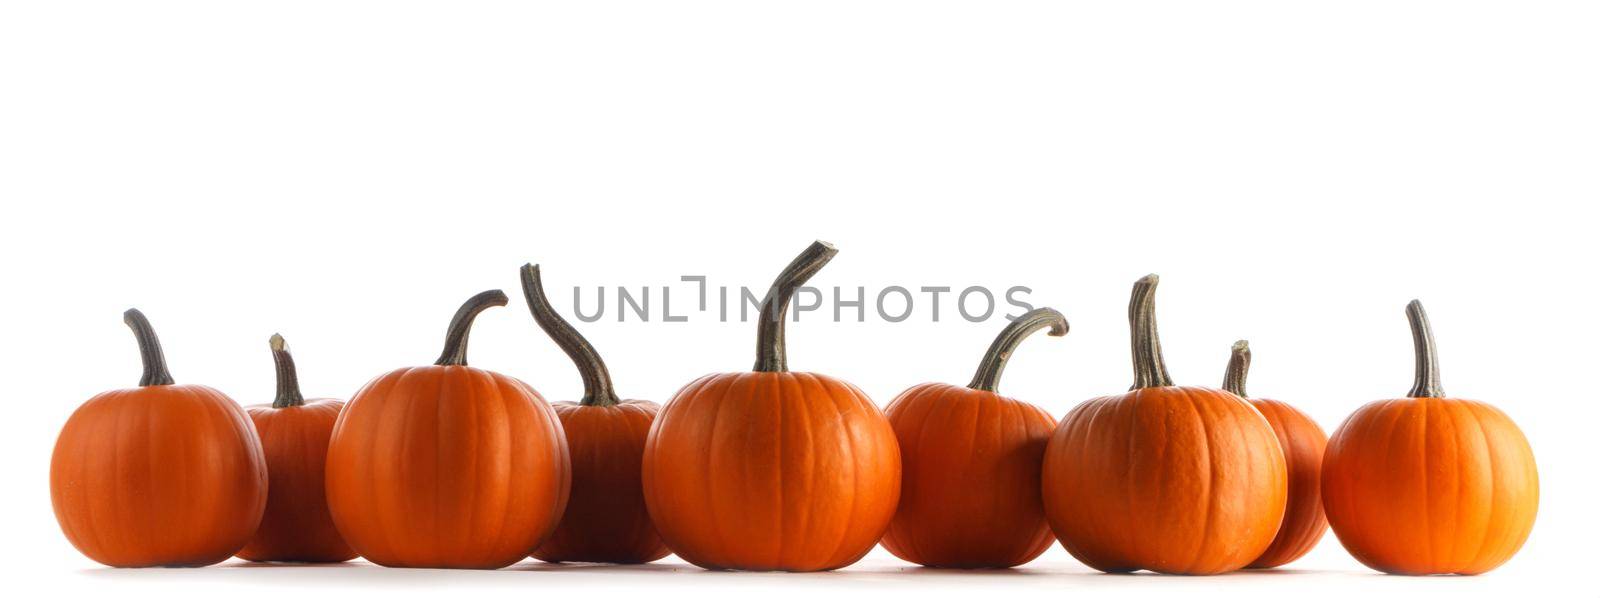 Autumn border of pumpkins in a row isolated on white background